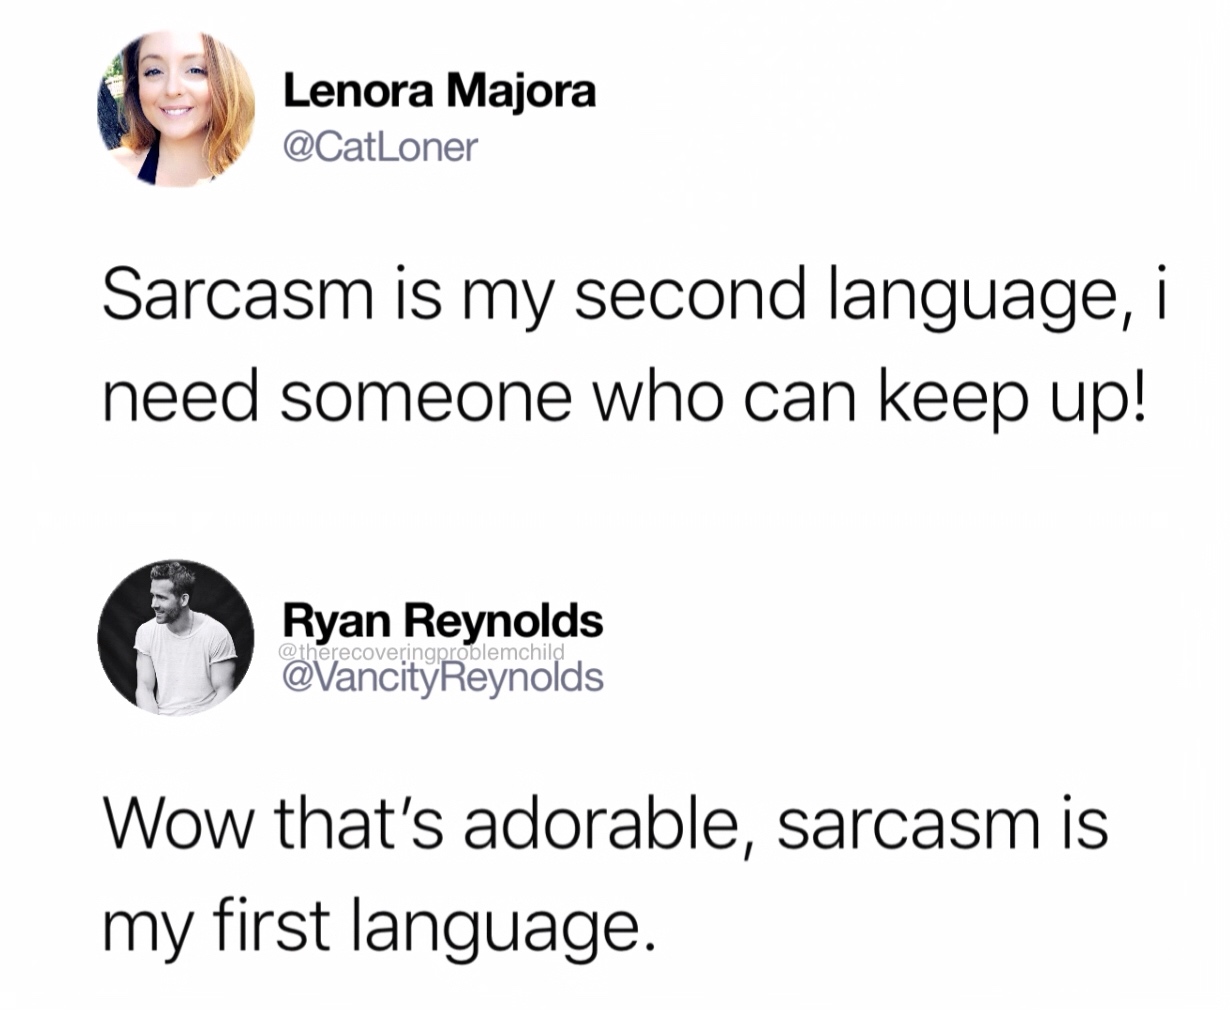 human behavior - Lenora Majora Sarcasm is my second language, i need someone who can keep up! Ryan Reynolds Wow that's adorable, sarcasm is my first language.